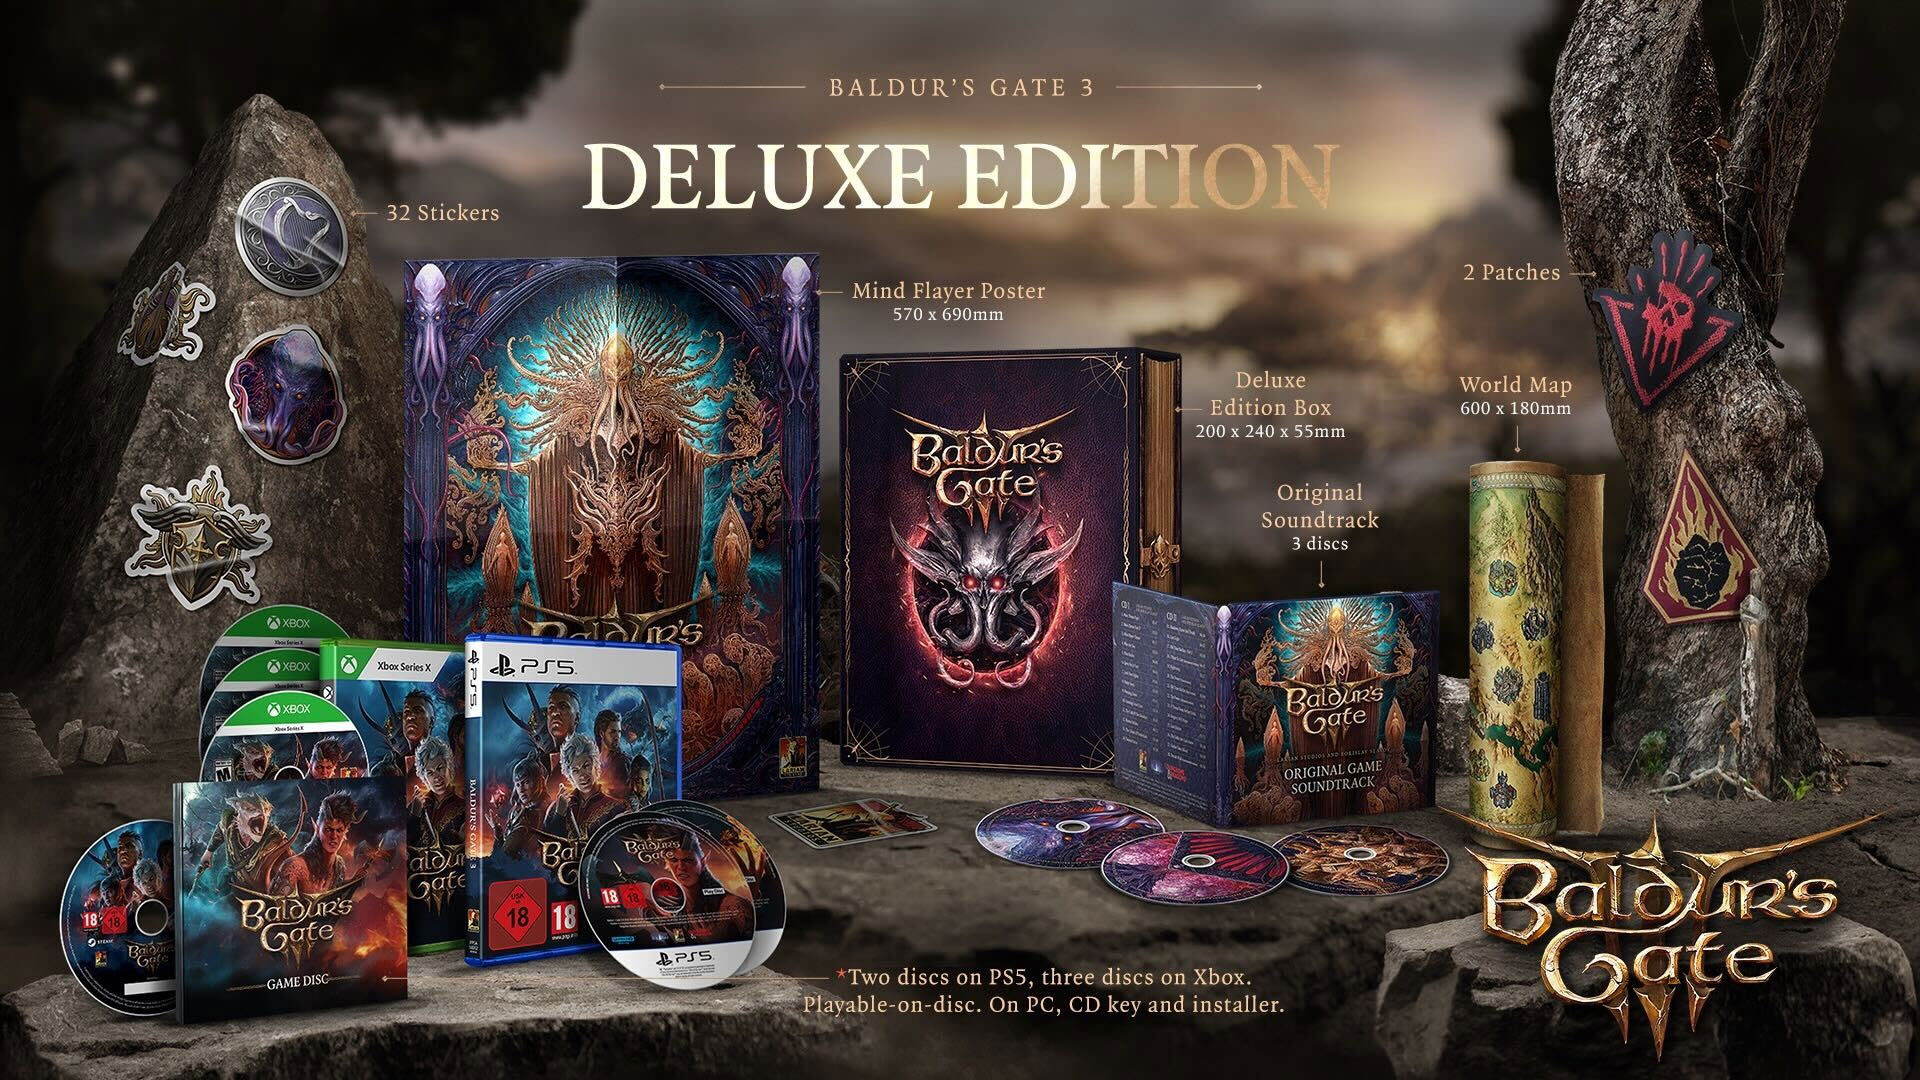 Baldur's Gate 3 is getting a physical deluxe edition for $79.99